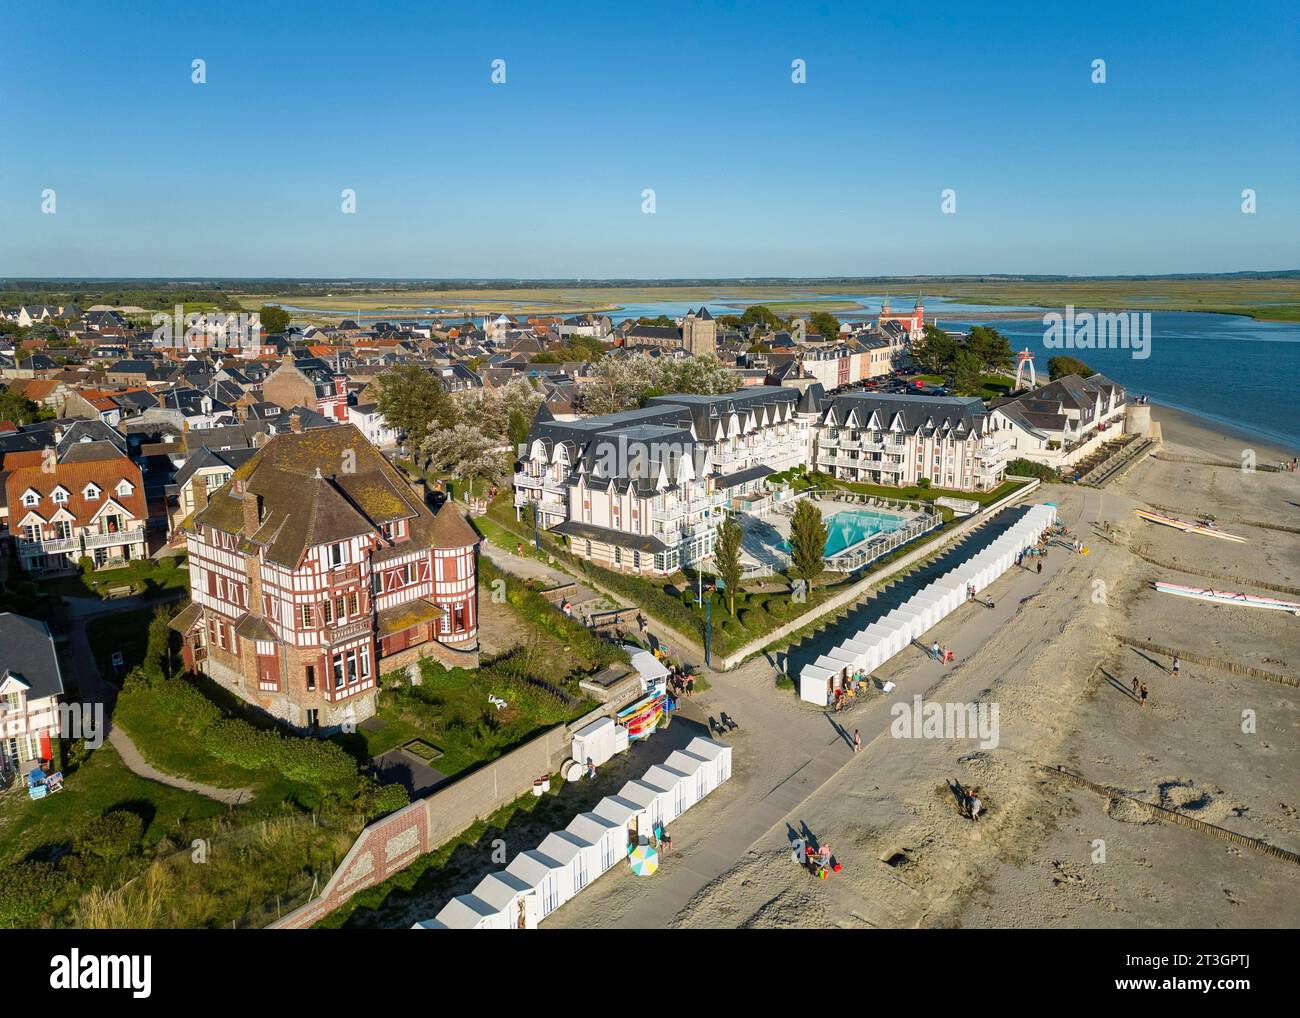 France, Somme, Baie de Somme, Le Crotoy, Pierre et vacances residence (aerial view) Stock Photo